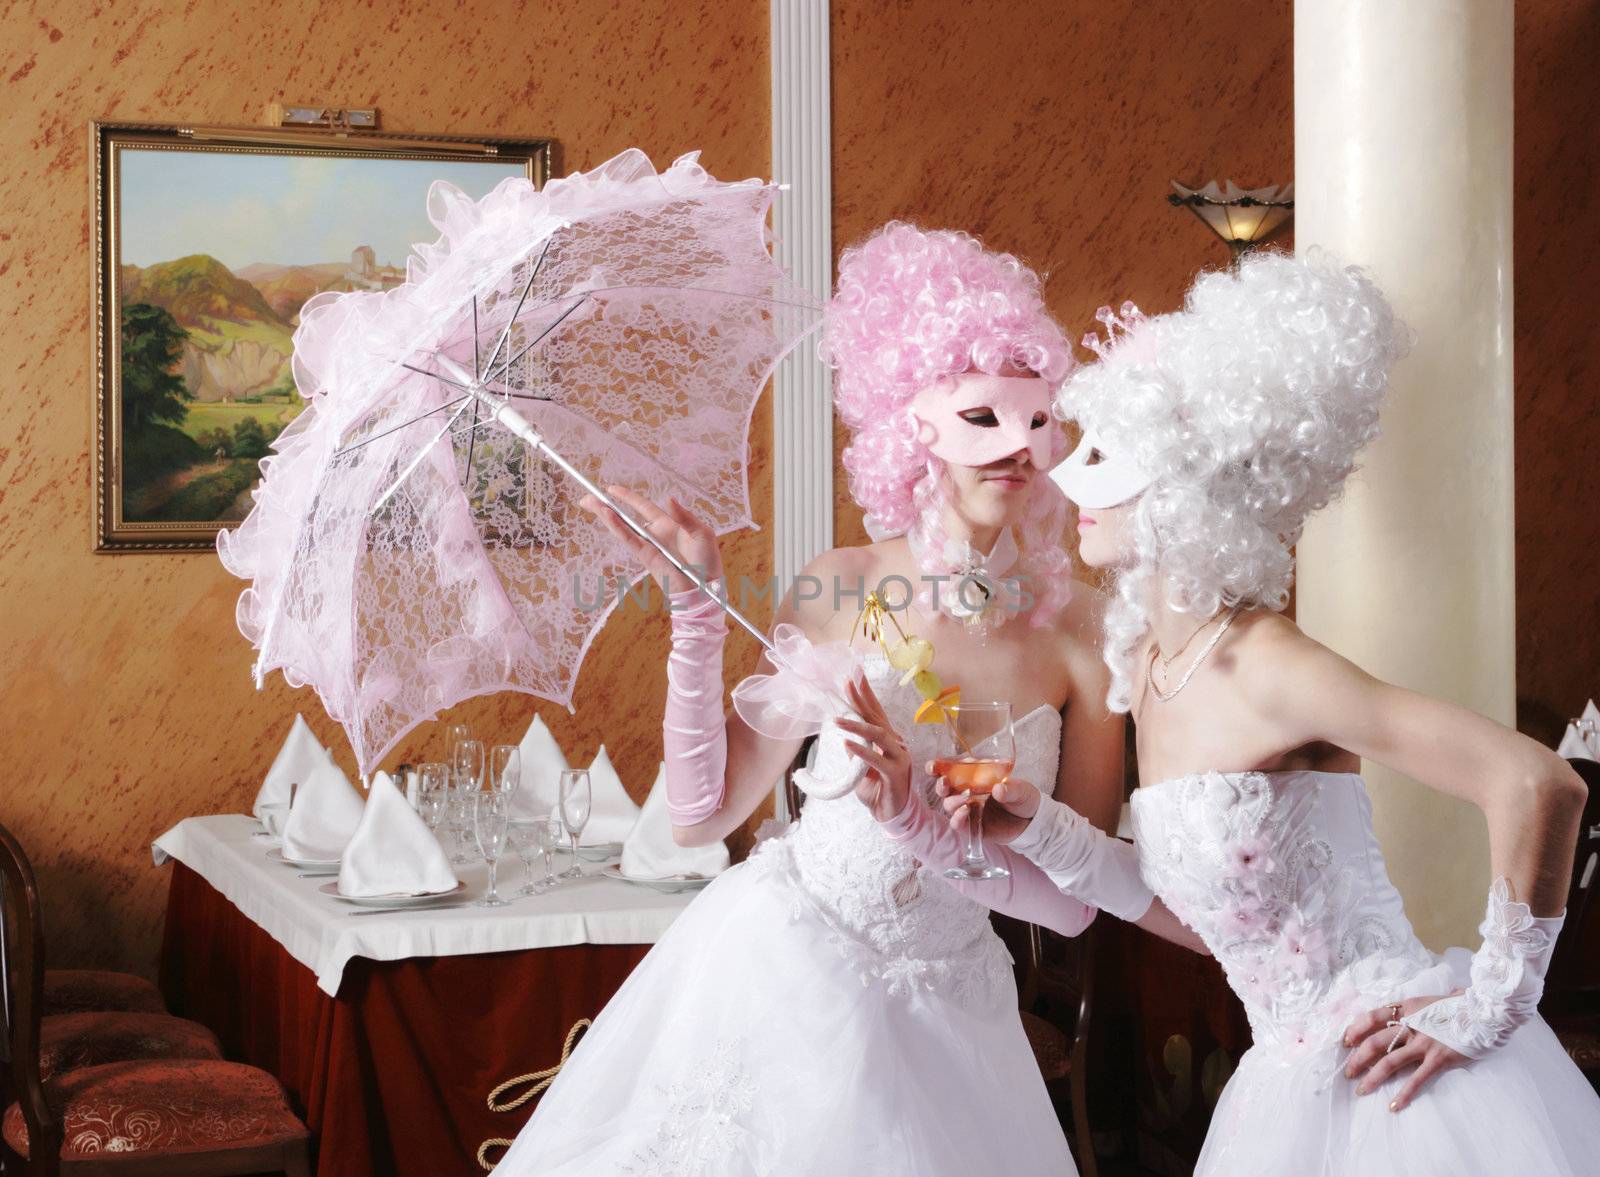 Two girls in wedding dresses and masks
